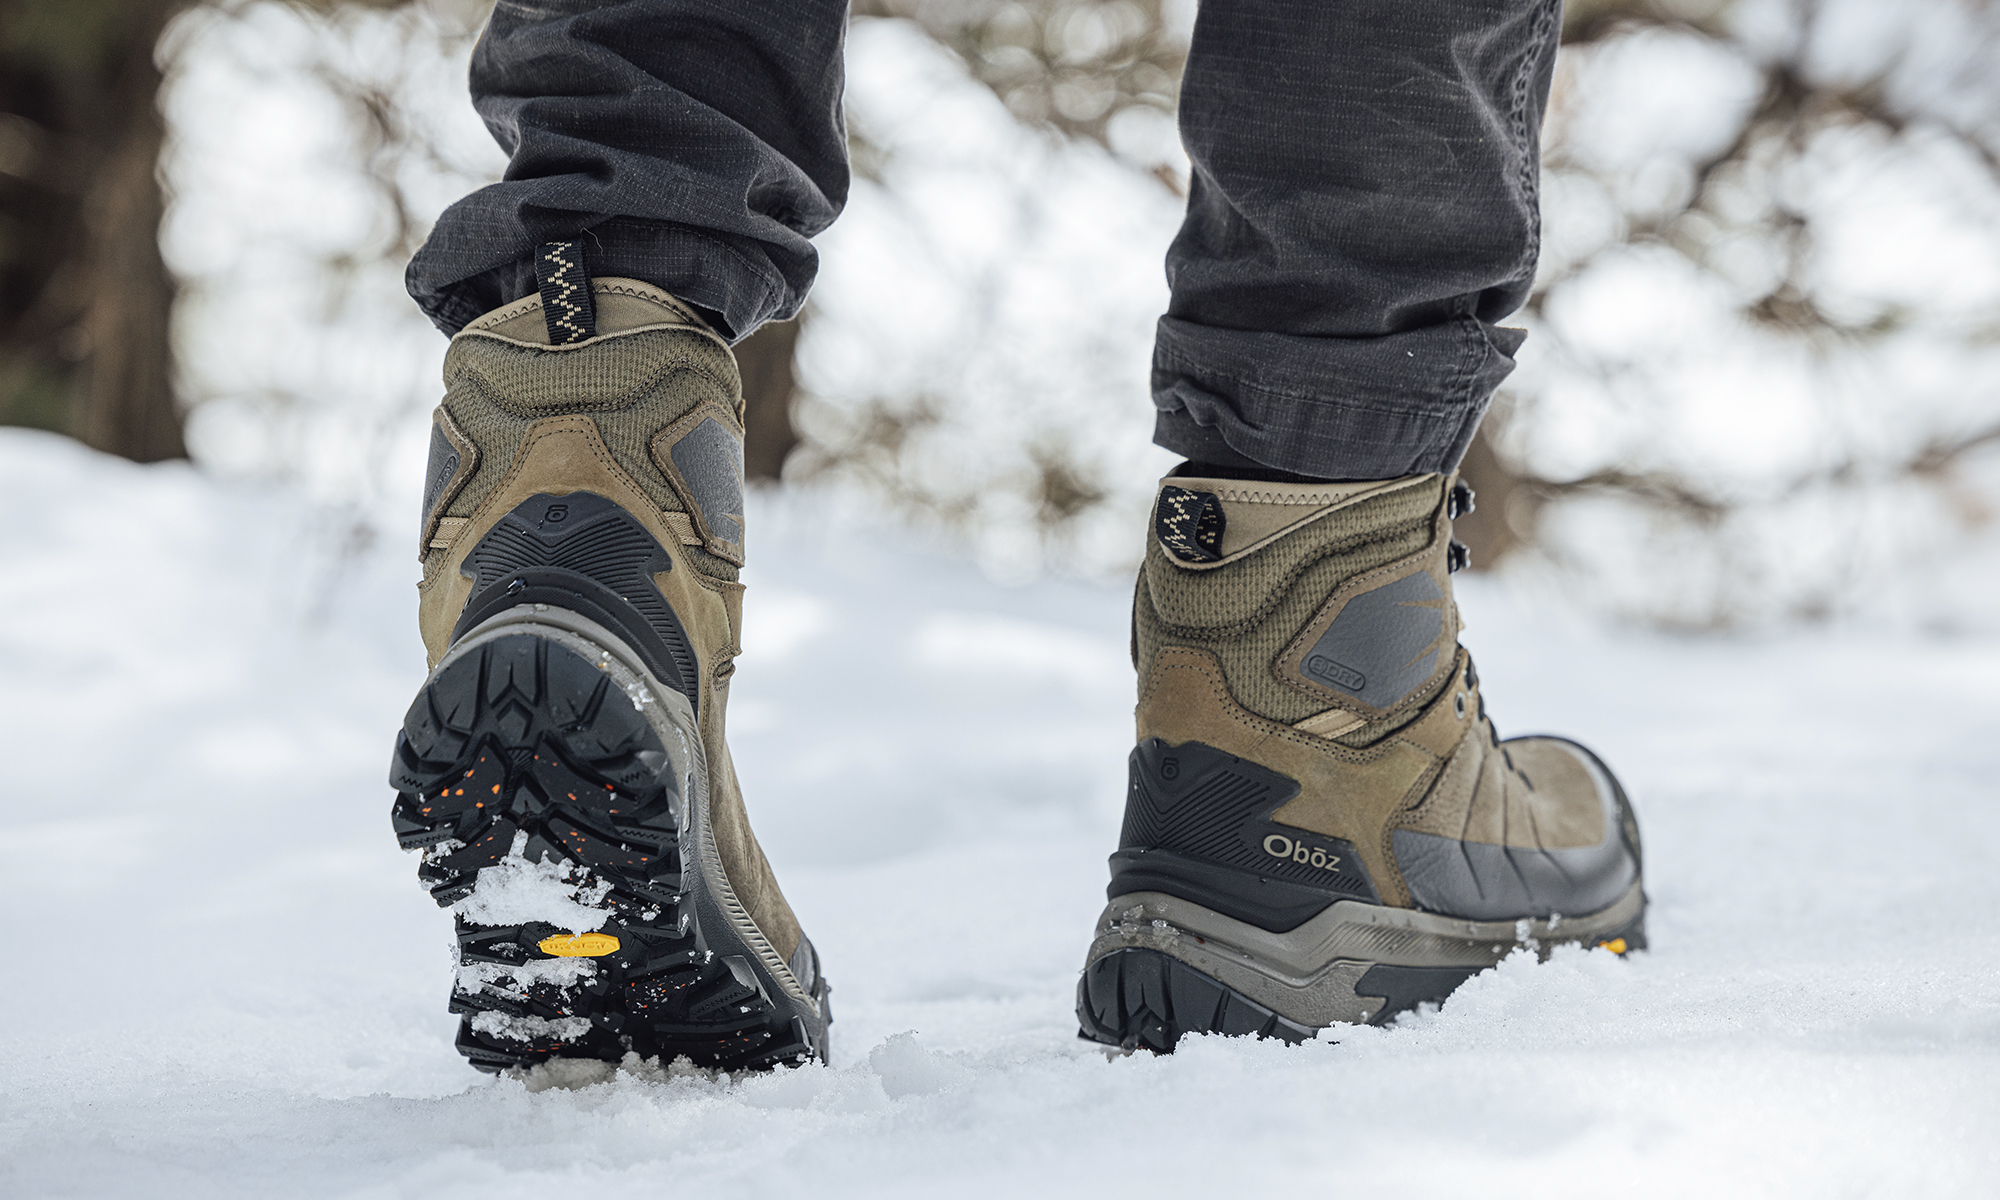 Oboz Bangtail Insulated Winter Boots in the snow.